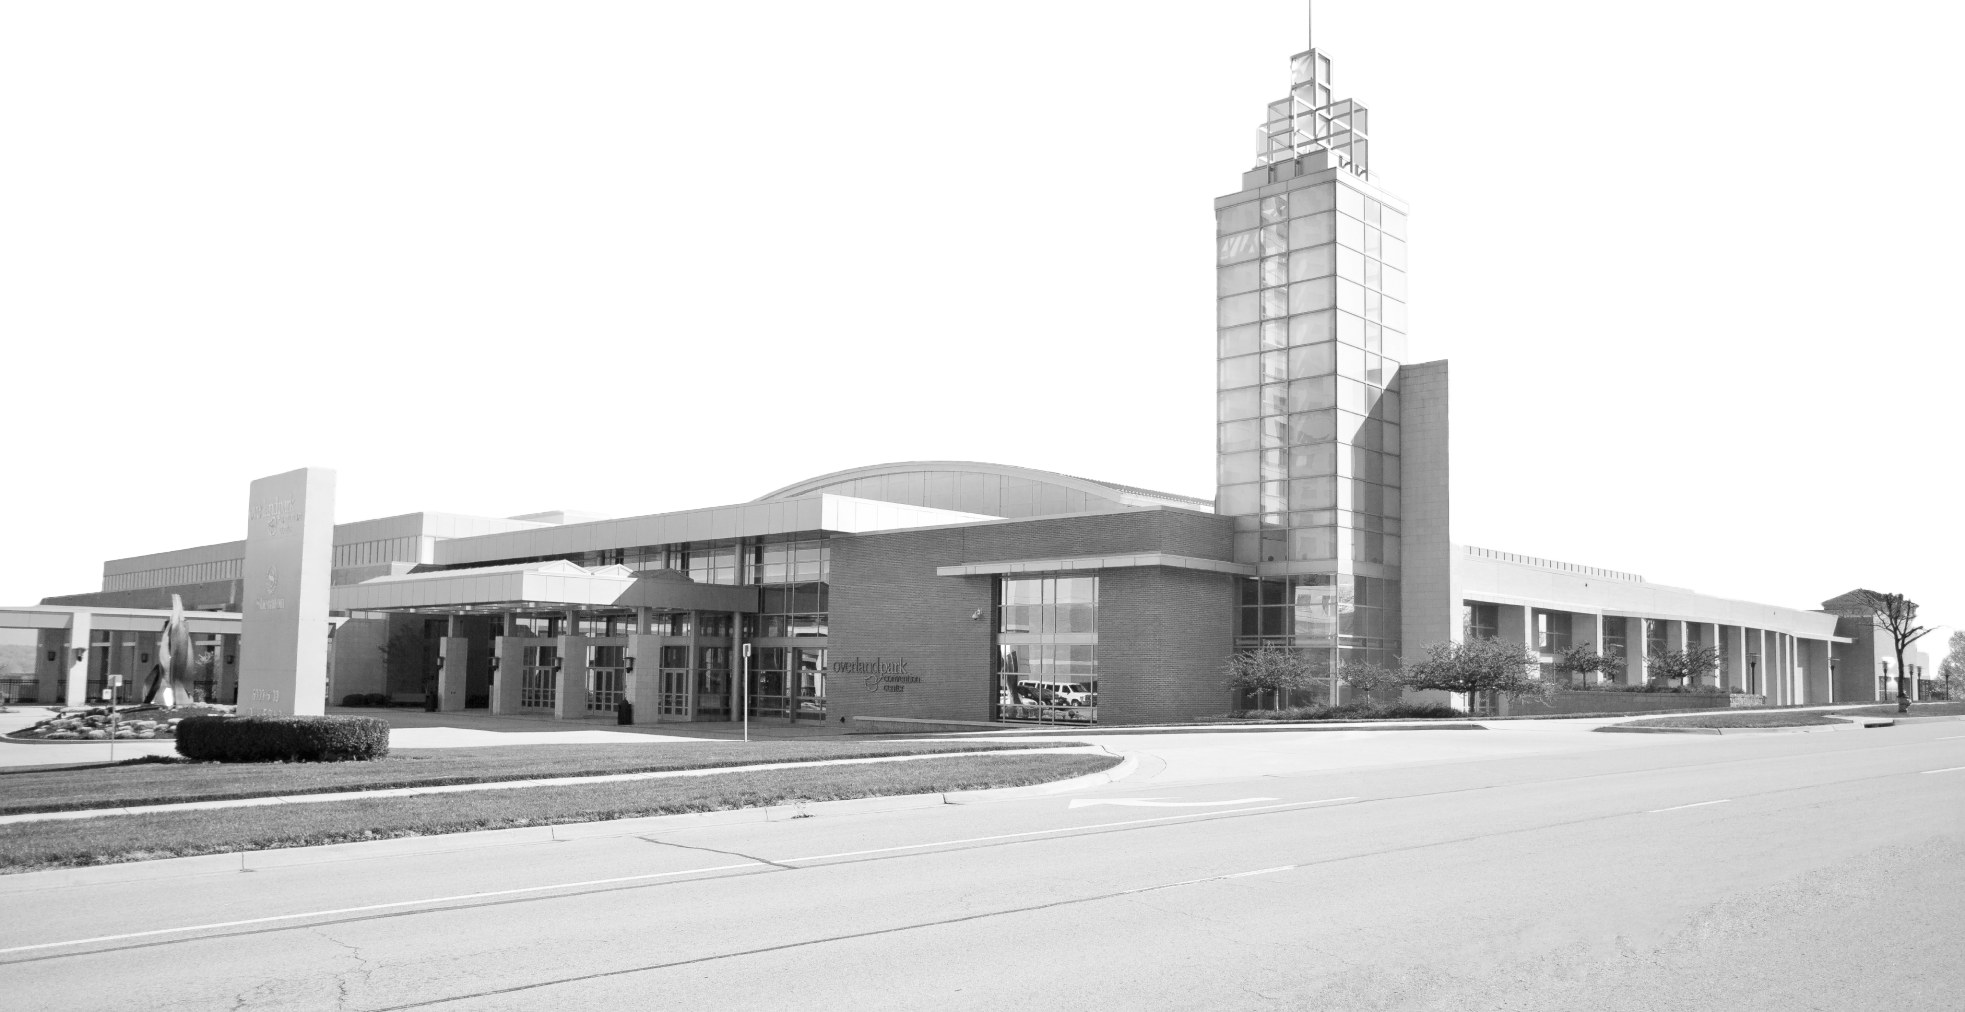 black and white image of the outside of the overland park convention center building